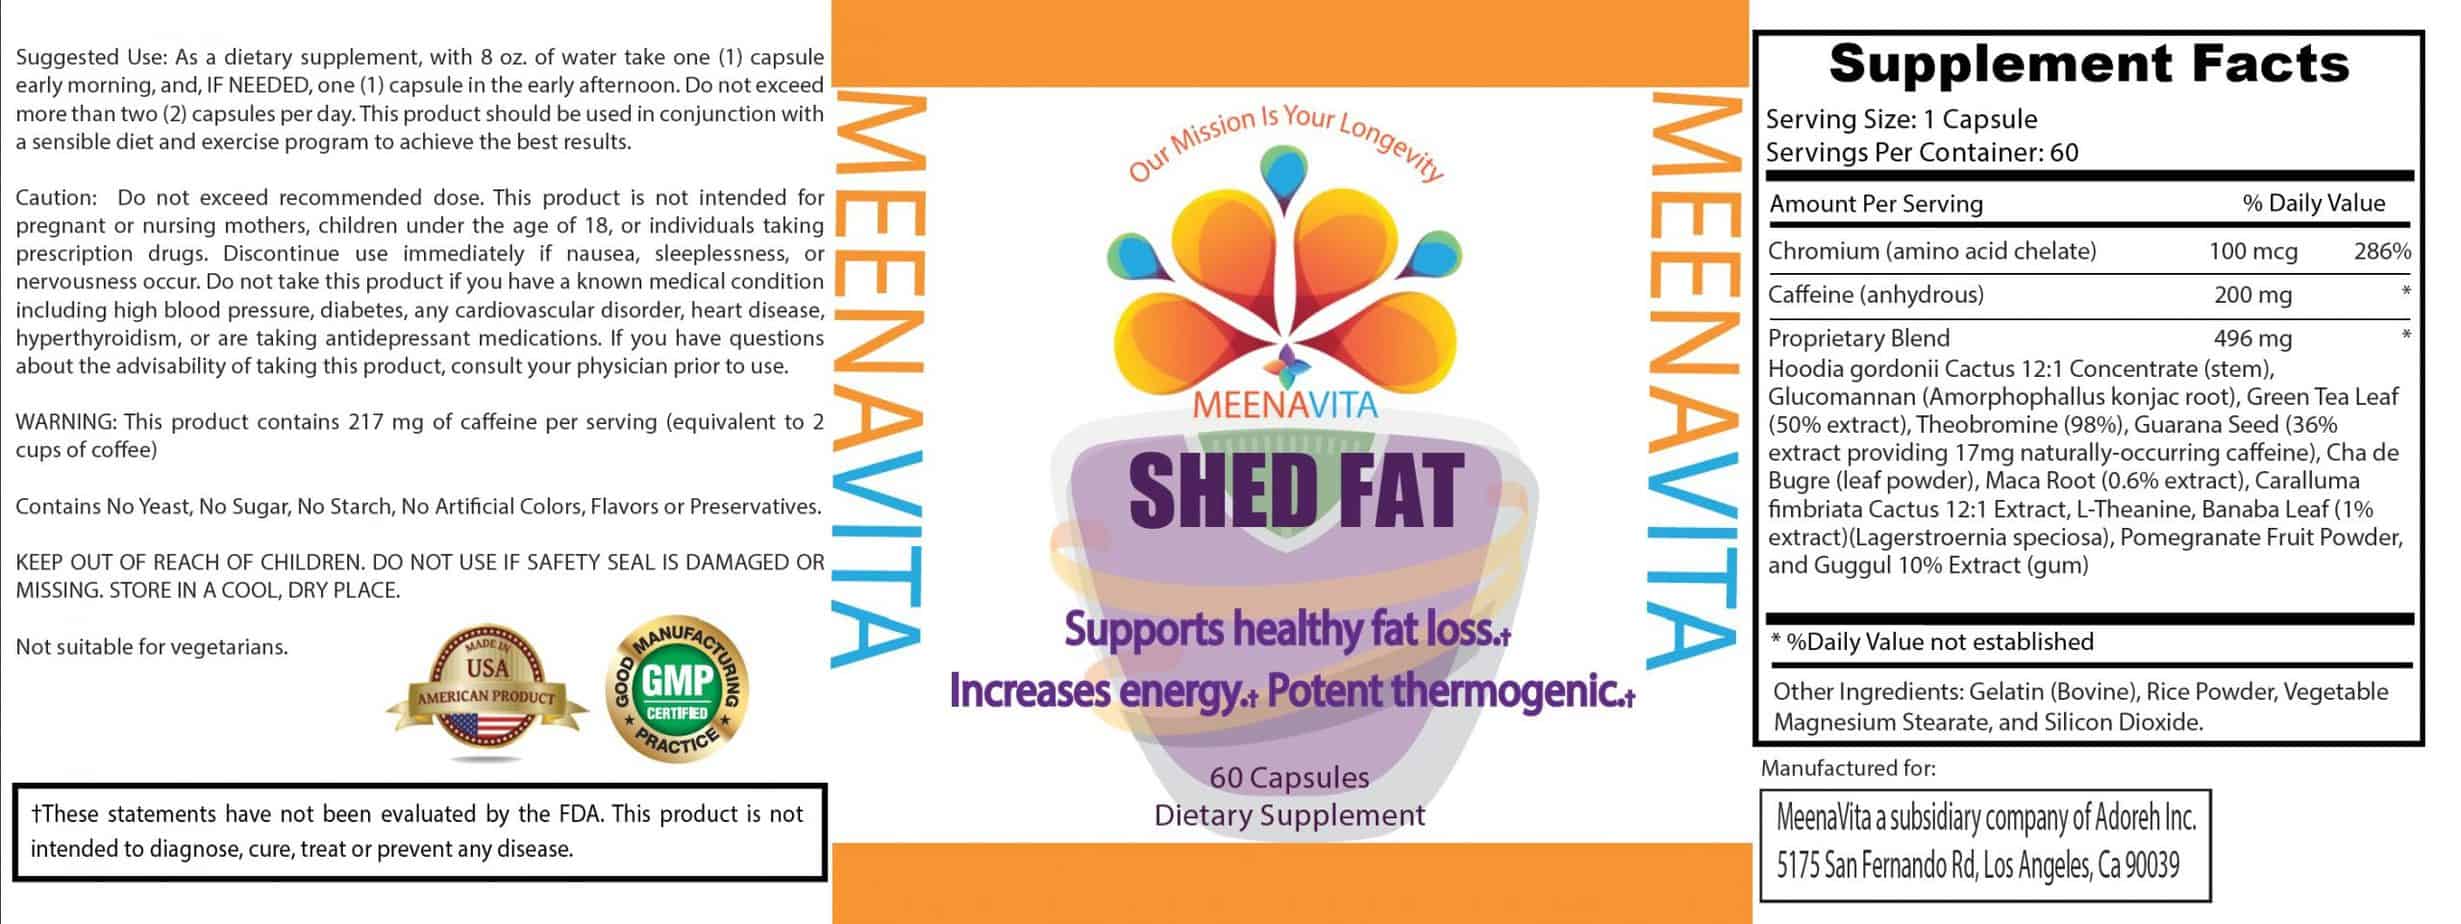 Weight Loss Shed Fat Burner